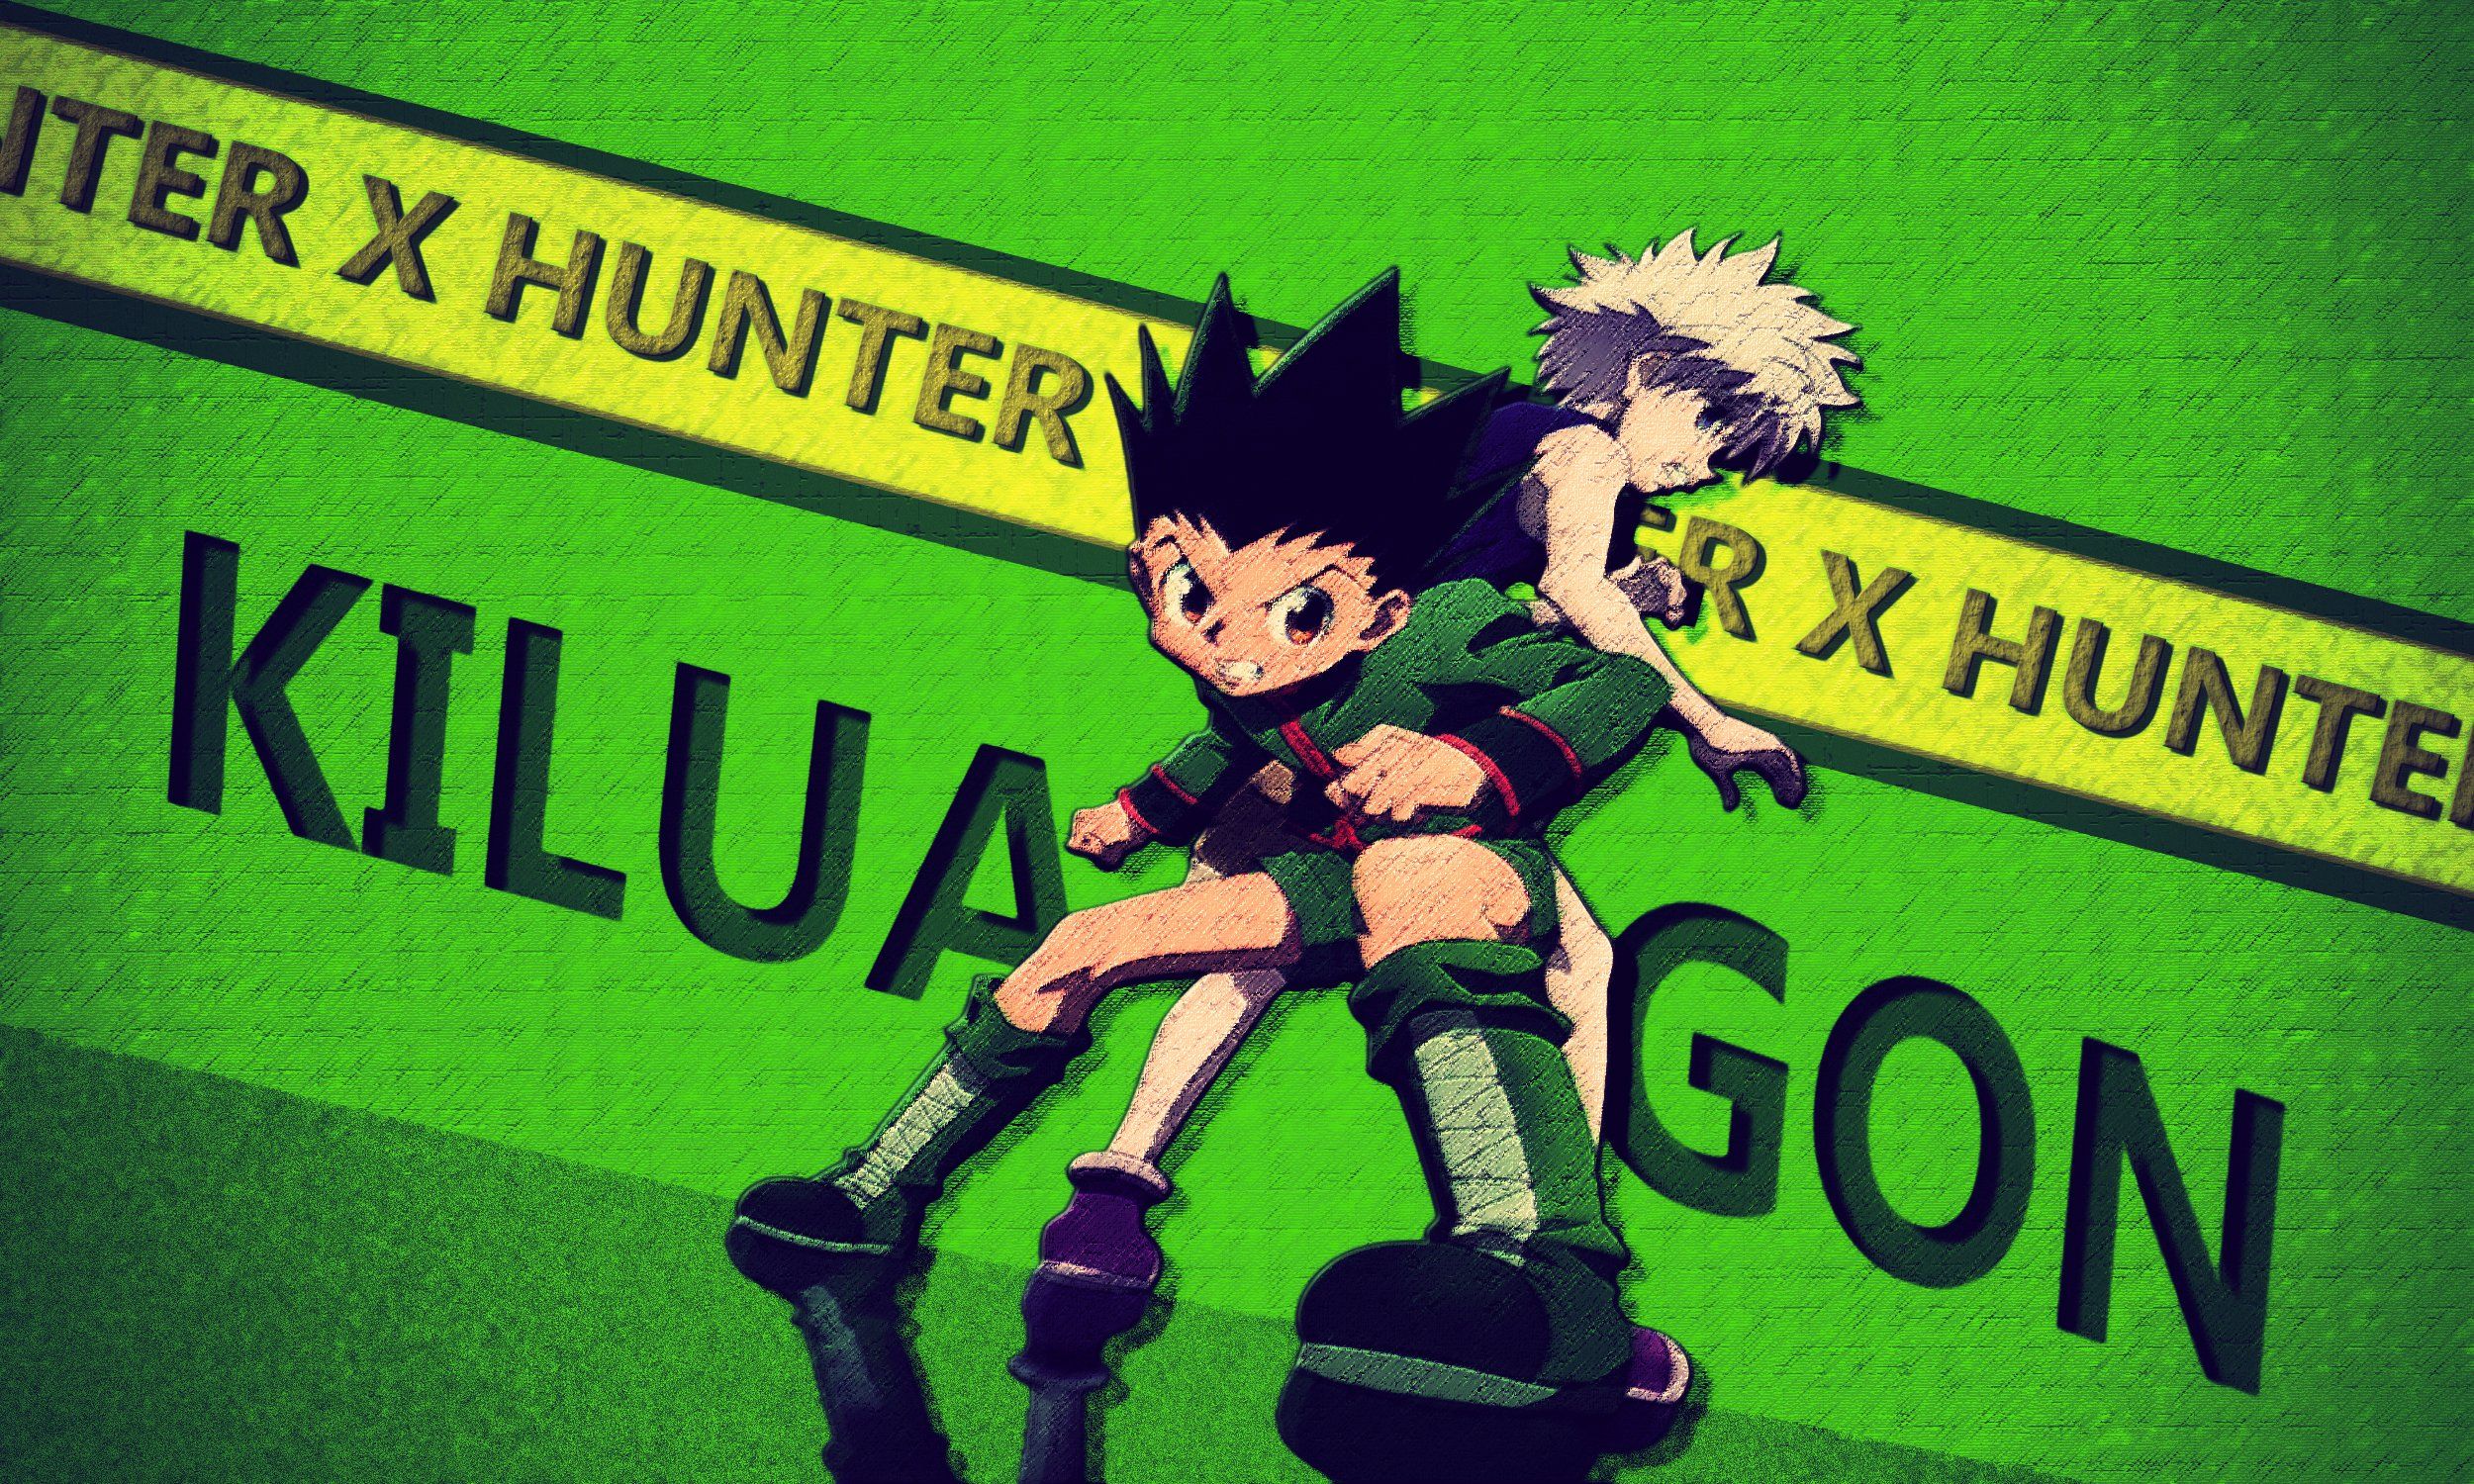 Gon Freecss Wallpapers - Wallpaper Cave